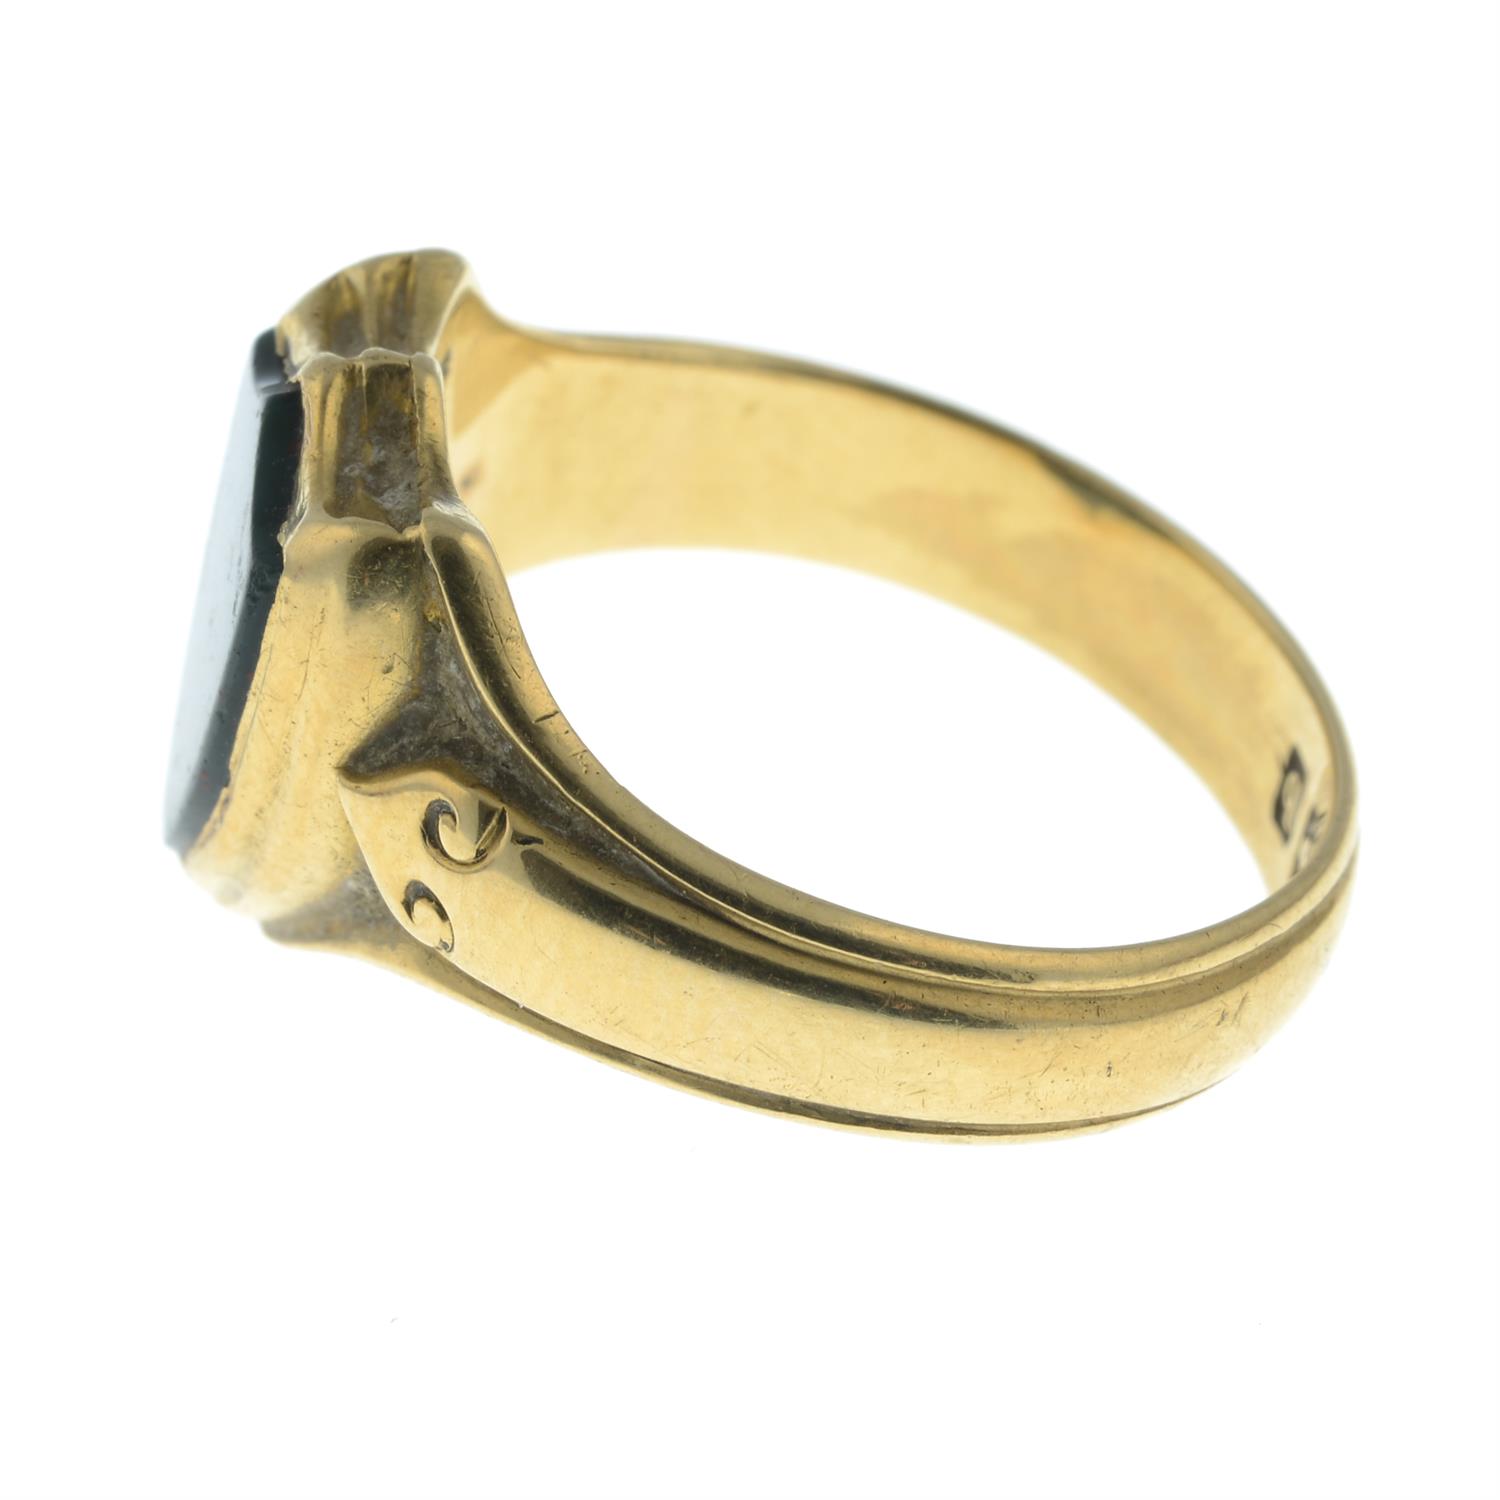 An Edwardian 18ct gold shield-shape glass signet ring. - Image 3 of 5